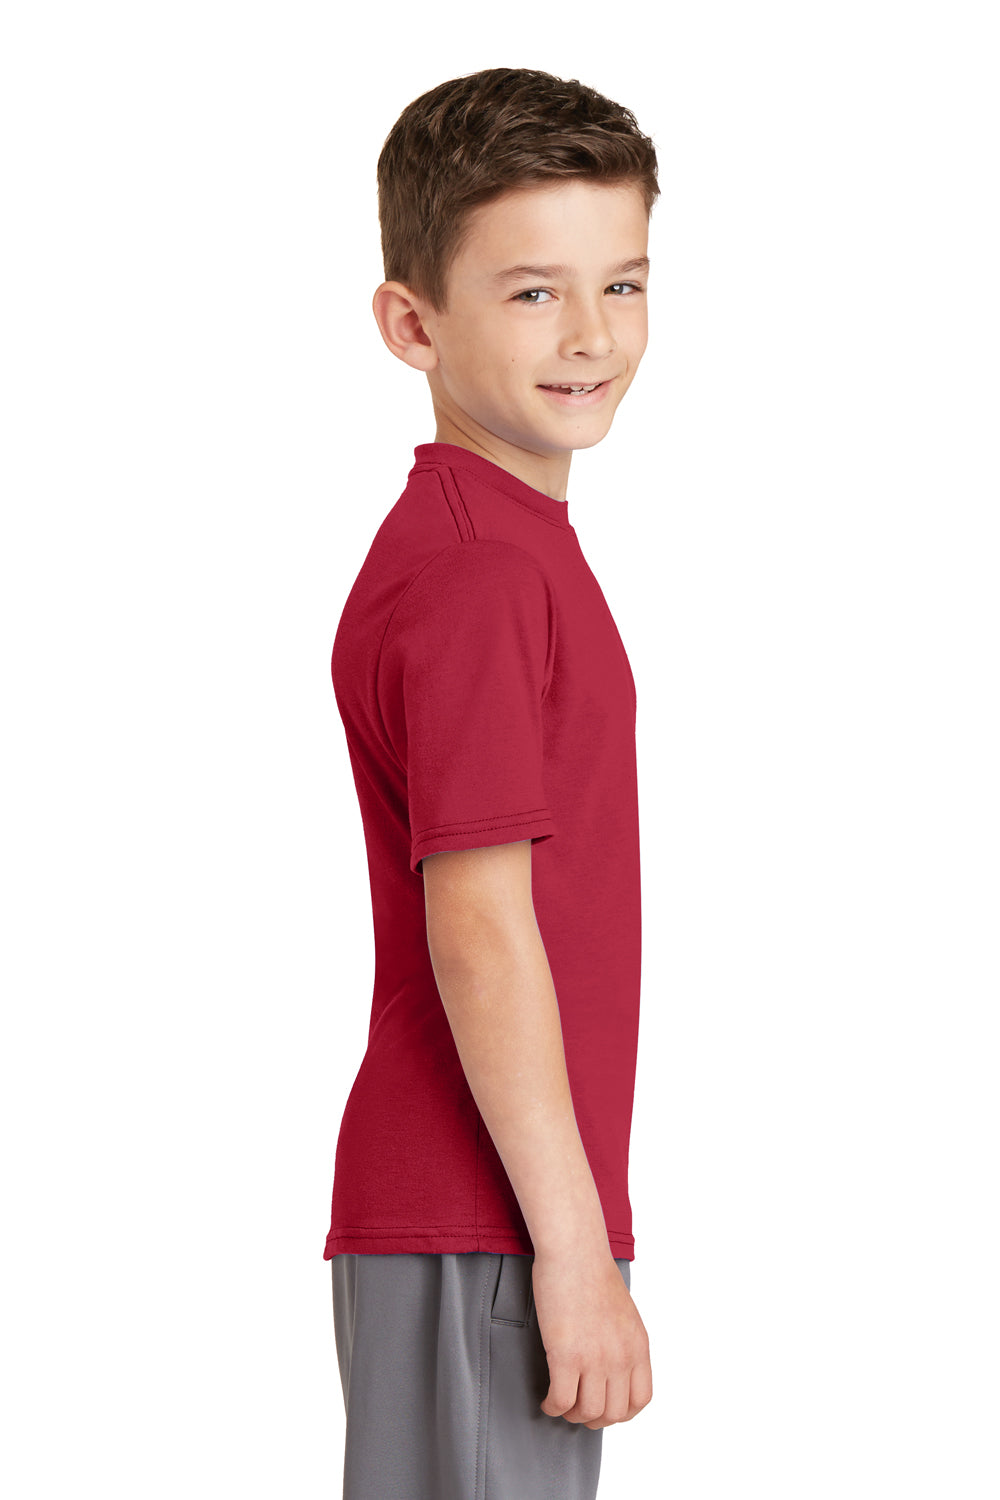 Port & Company PC381Y Youth Dry Zone Performance Moisture Wicking Short Sleeve Crewneck T-Shirt Red Side